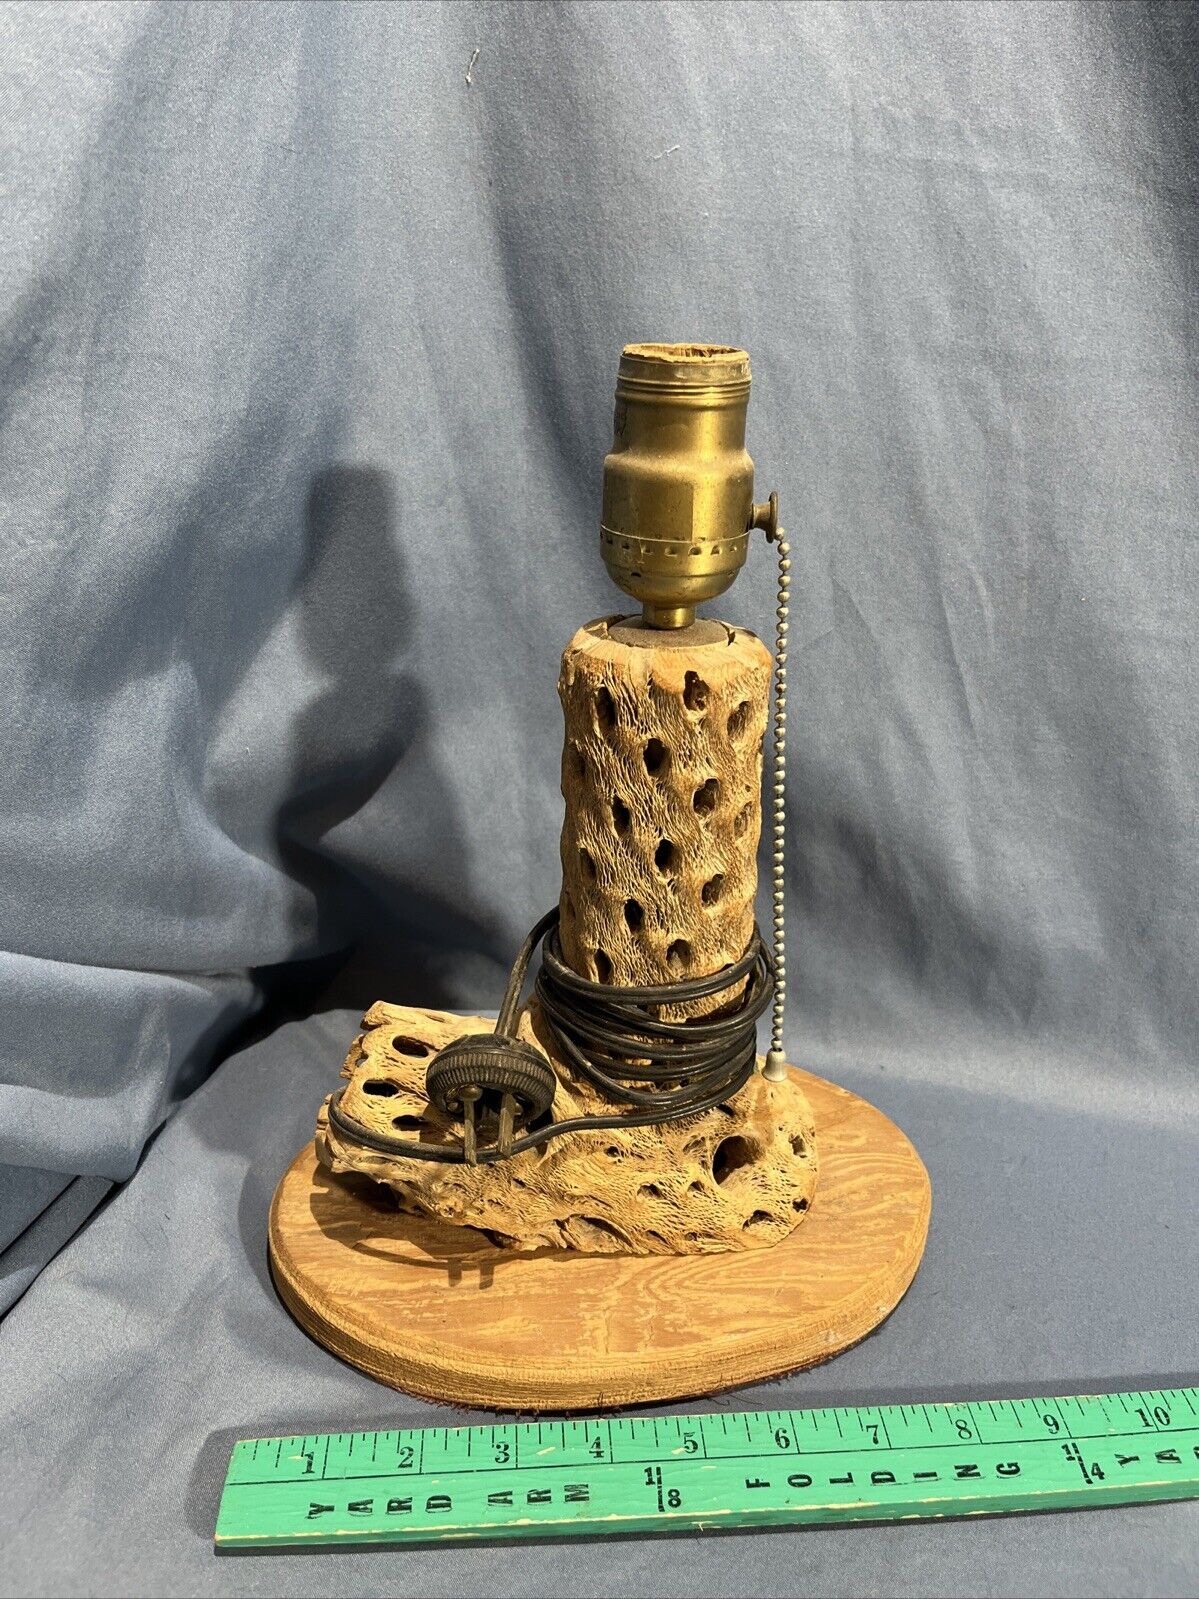 Vintage Handmade Cactus Wood Table Lamp in working condition